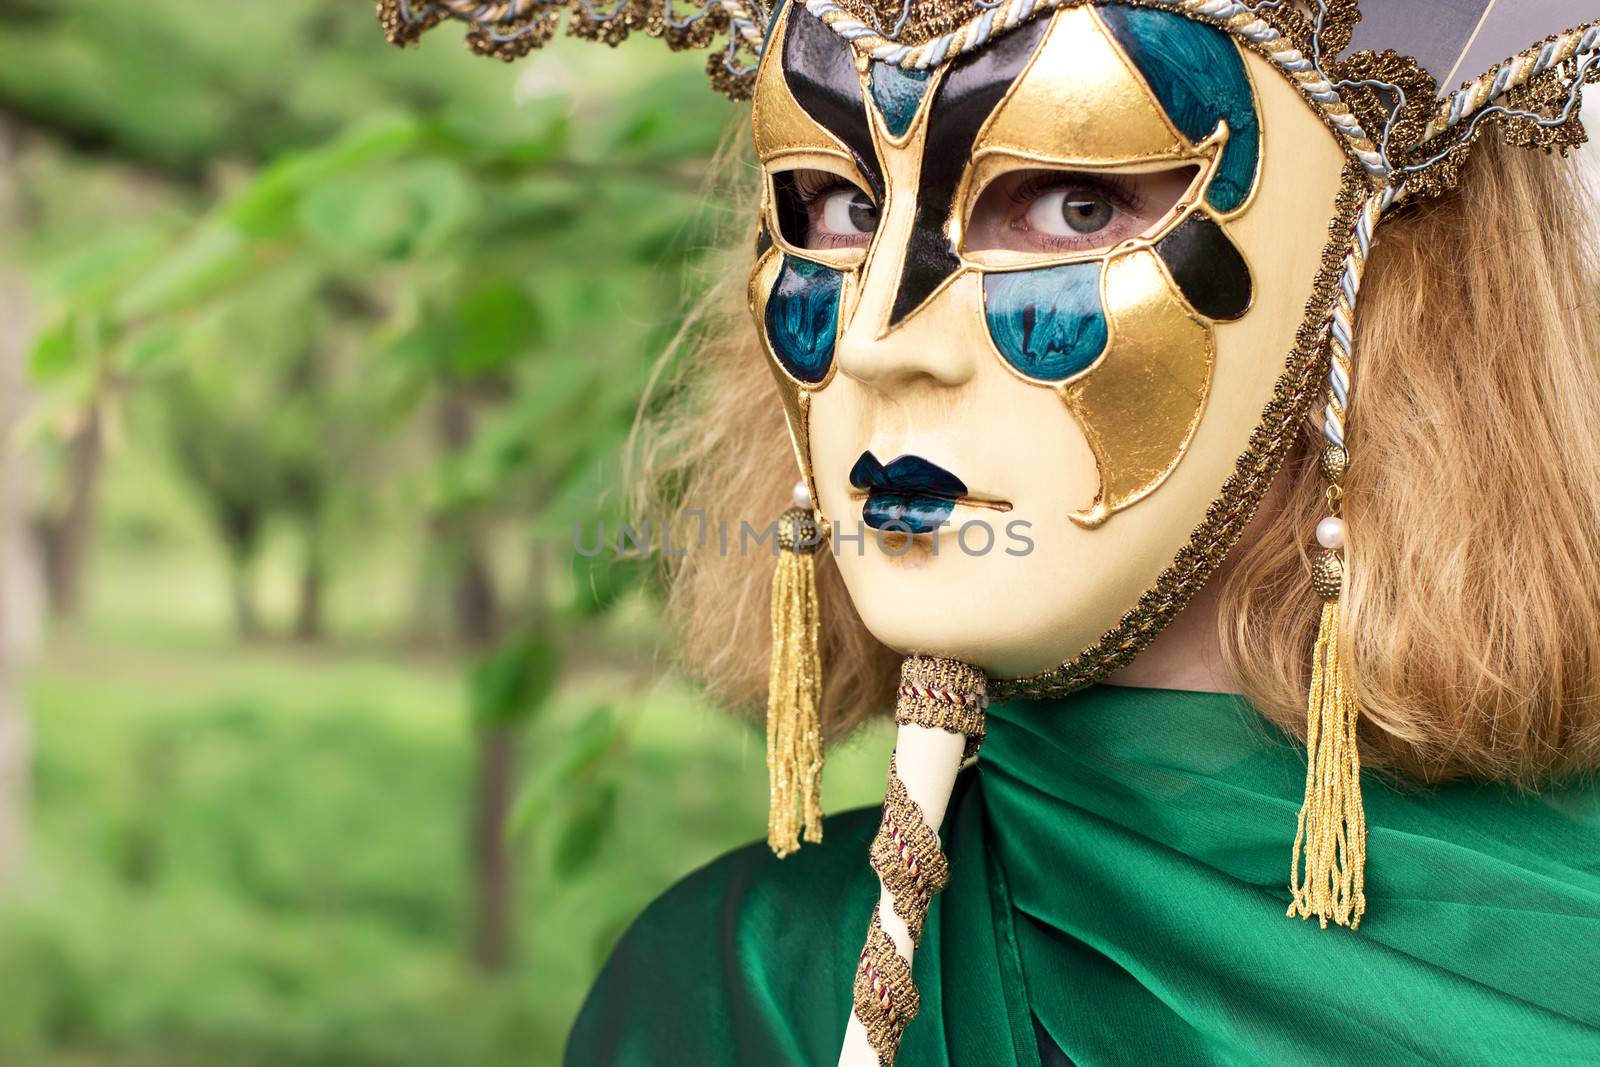 Beautiful woman in carnival mask over foliage background by deamles